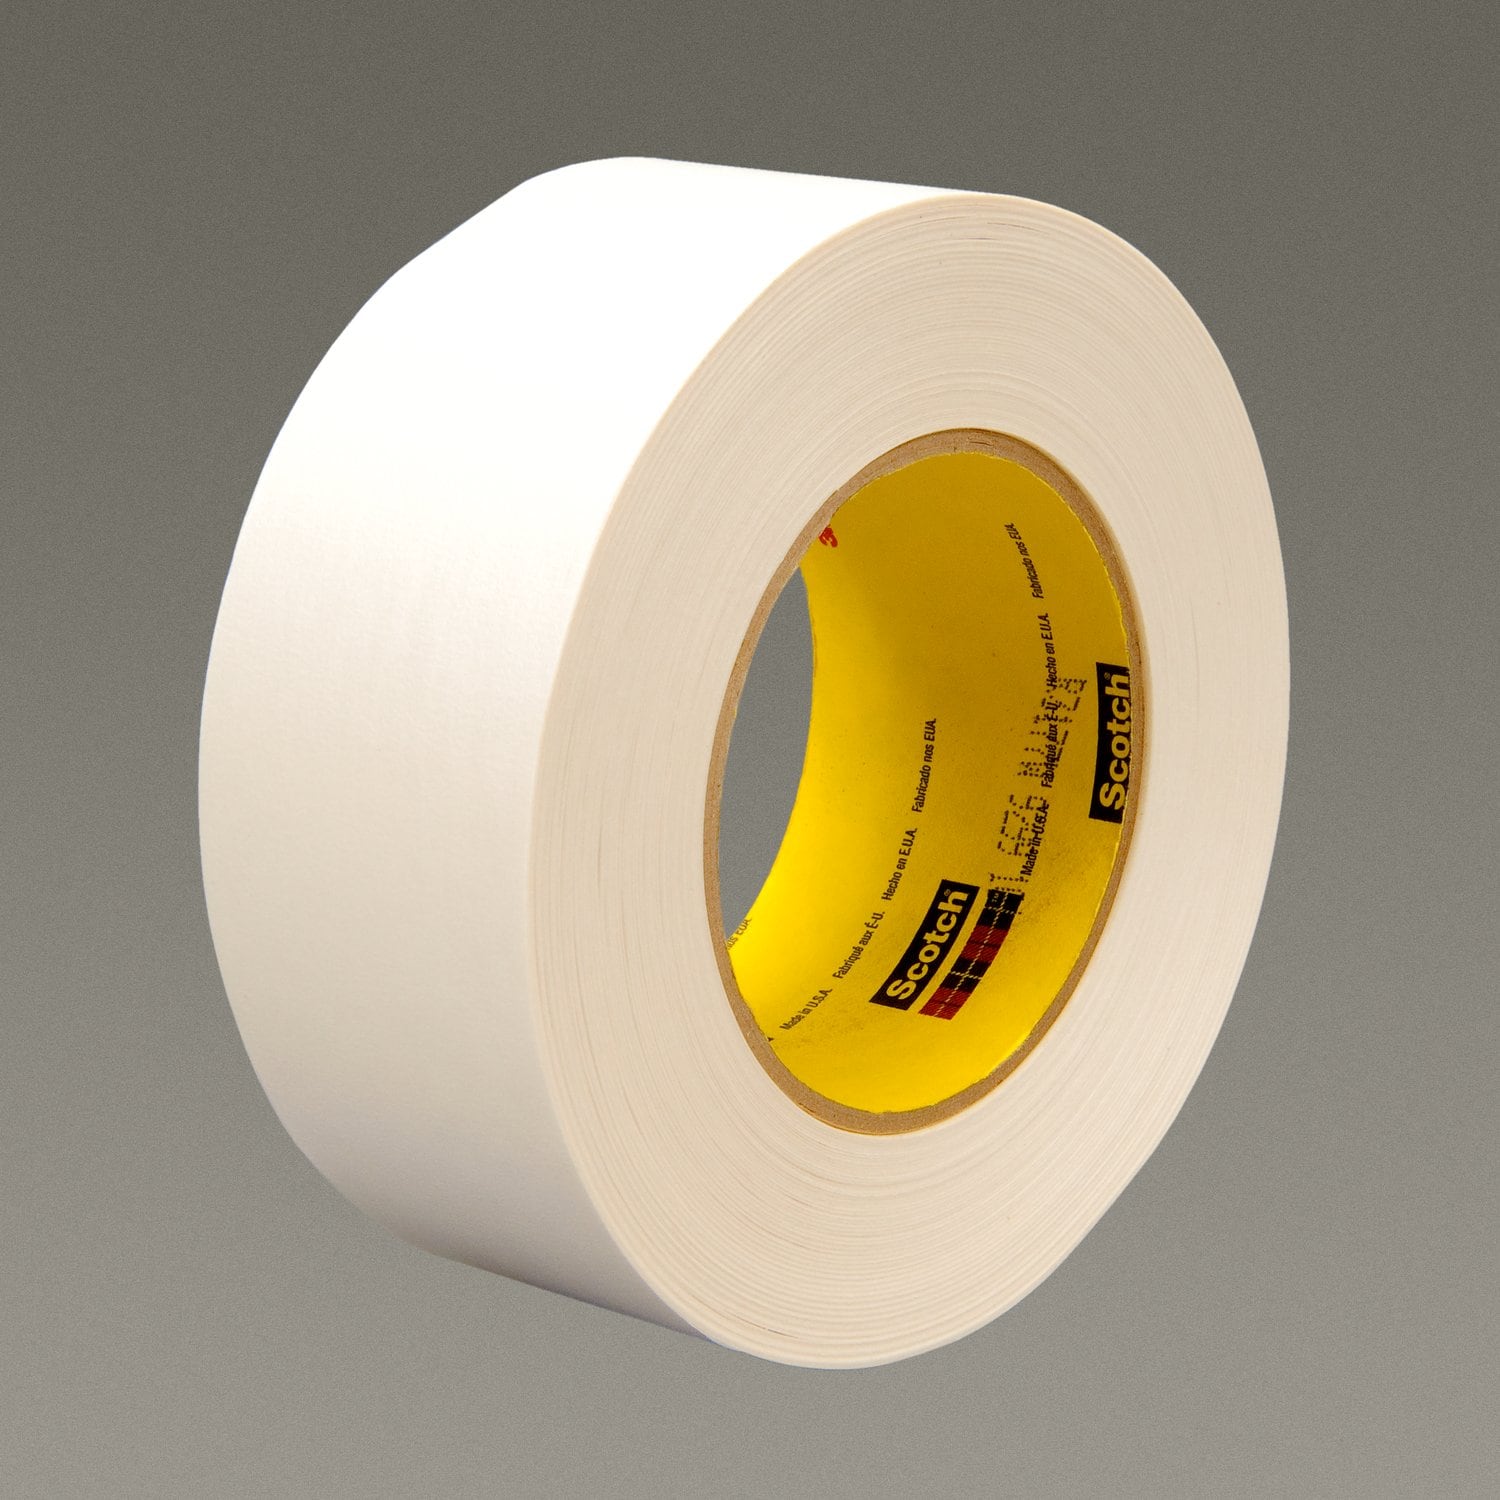 7100028052 - 3M Repulpable Strong Single Coated Tape R3187, White, 72 mm x 55 m, 7.5
mil, 12 rolls per case